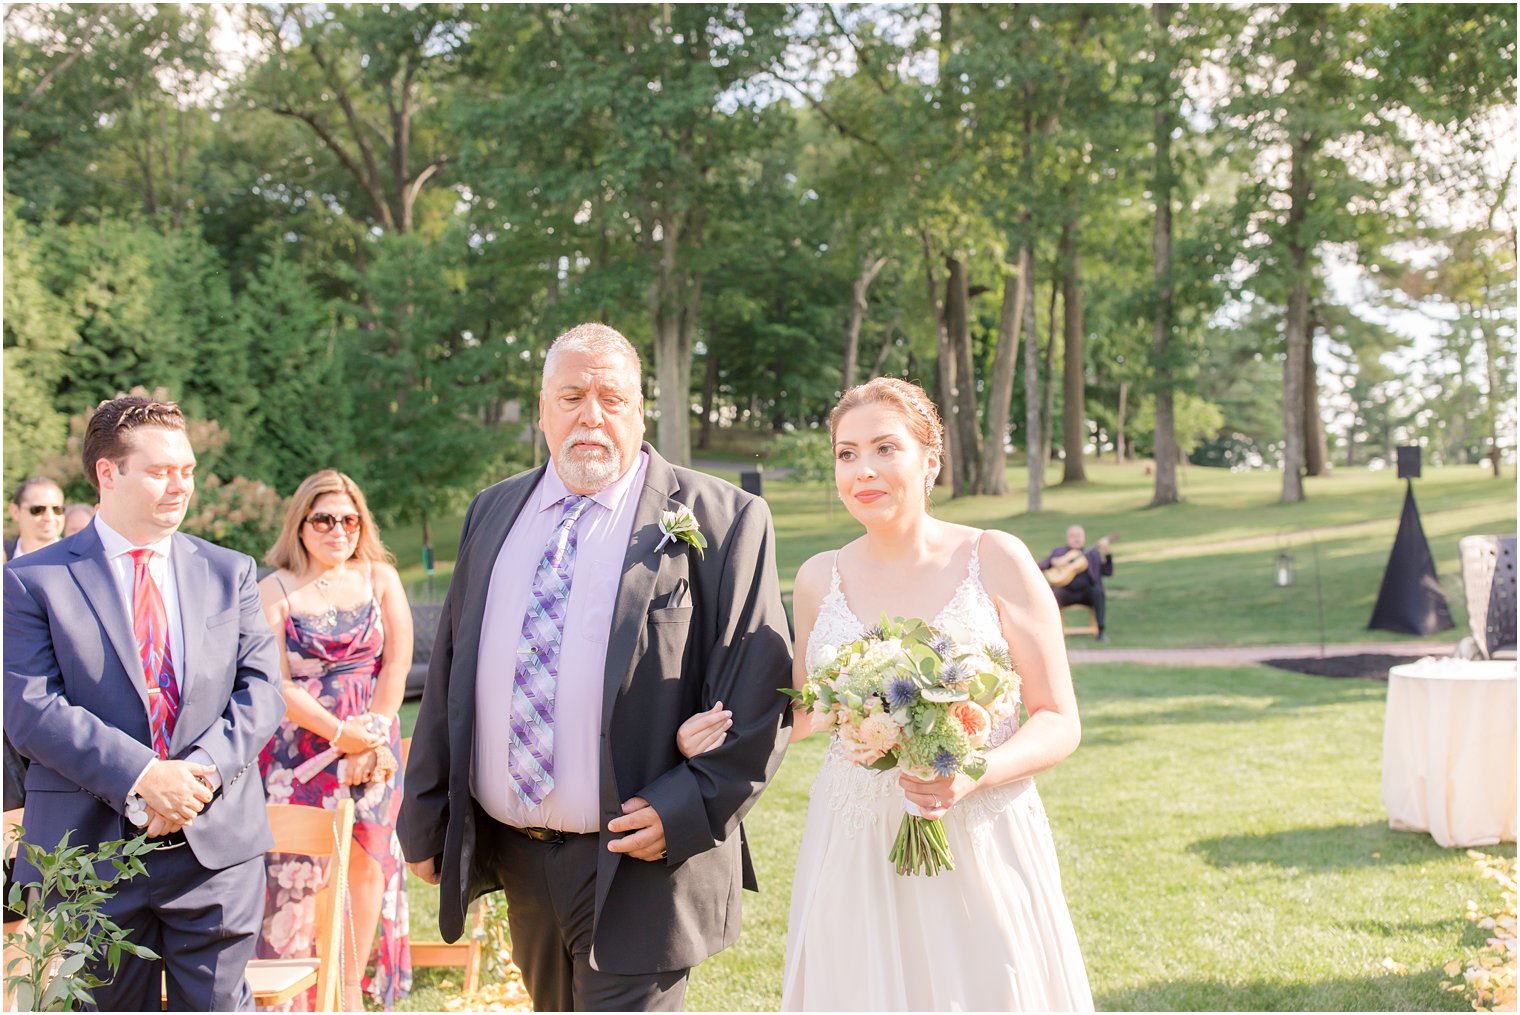 Bride processional Outdoor wedding ceremony at Ninety Acres at Natirar in Peapack NJ